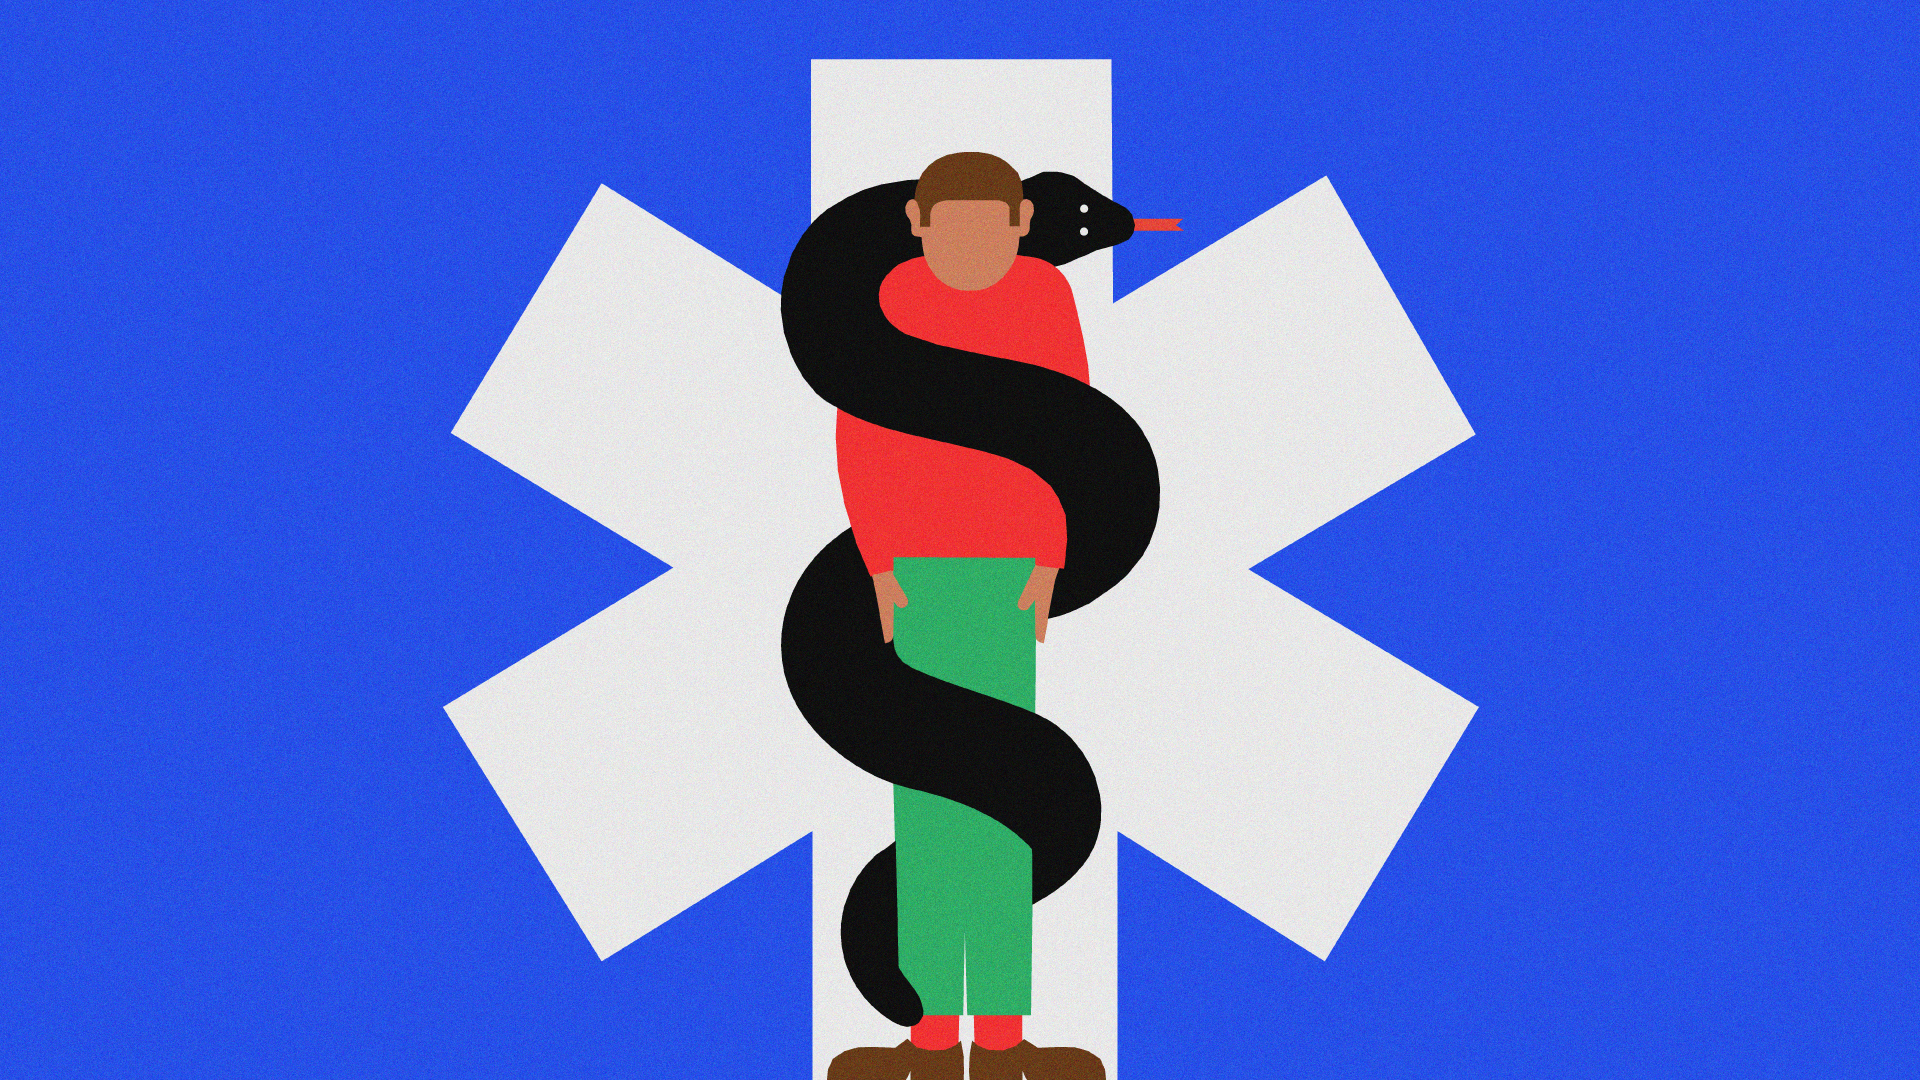 A man being held in place by a serpent tightly wound around his body, in the style of the rod of Asclepius.